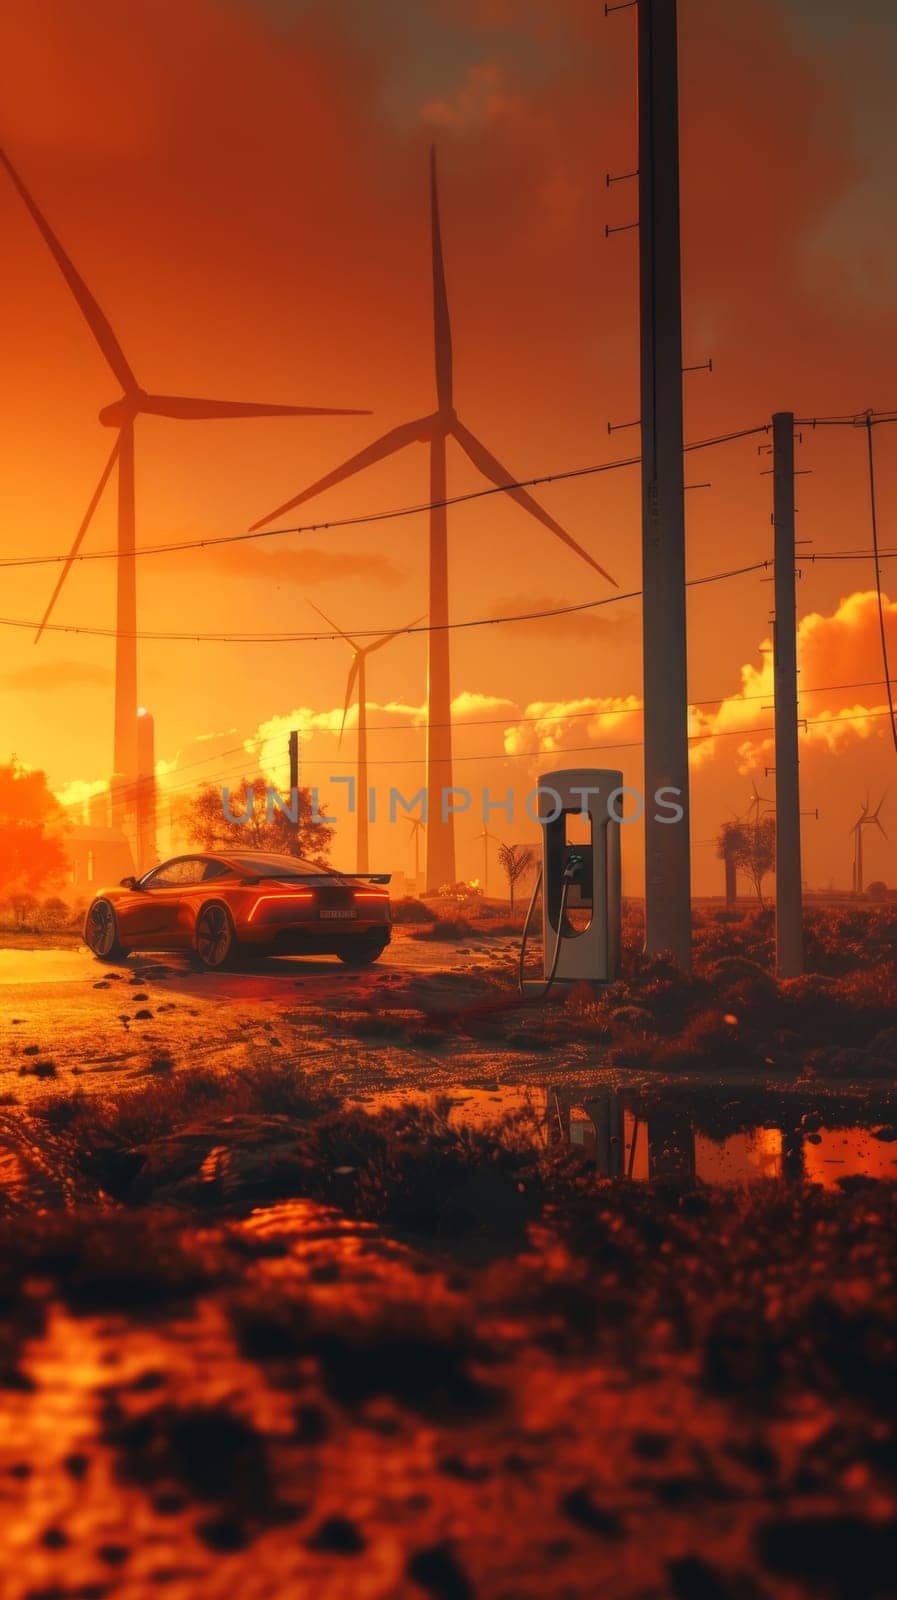 Electric vehicle charging amidst a field of wind turbines during a stunning orange-hued sunset